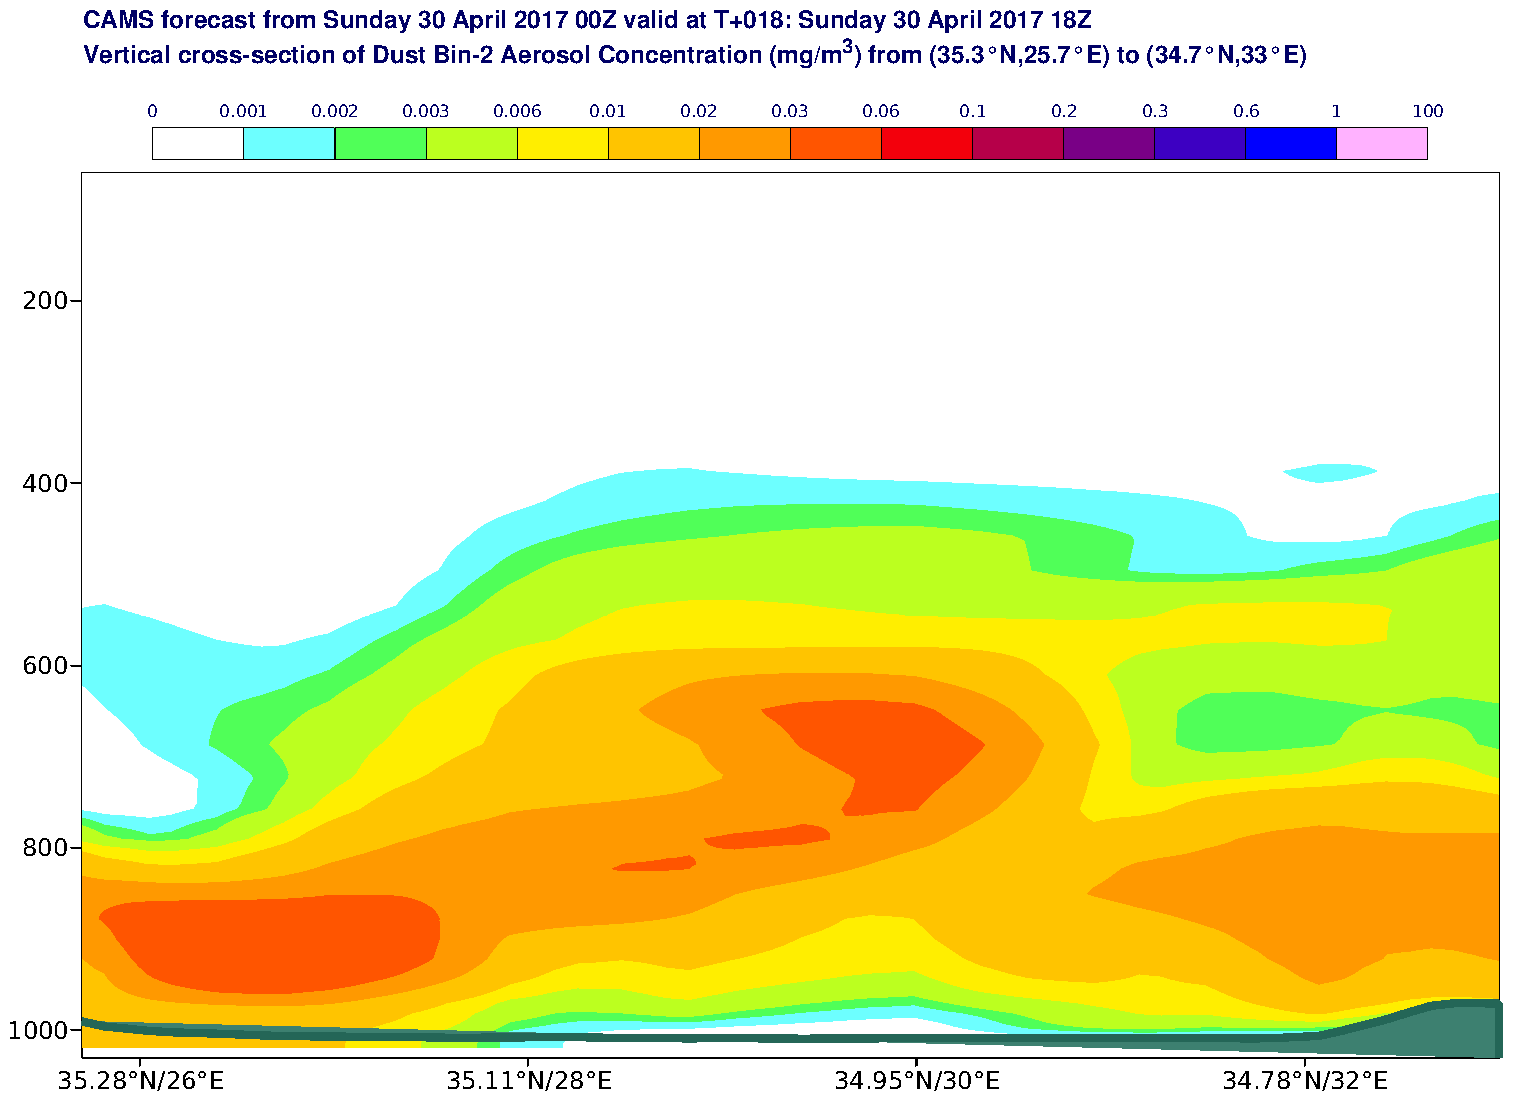 Vertical cross-section of Dust Bin-2 Aerosol Concentration (mg/m3) valid at T18 - 2017-04-30 18:00